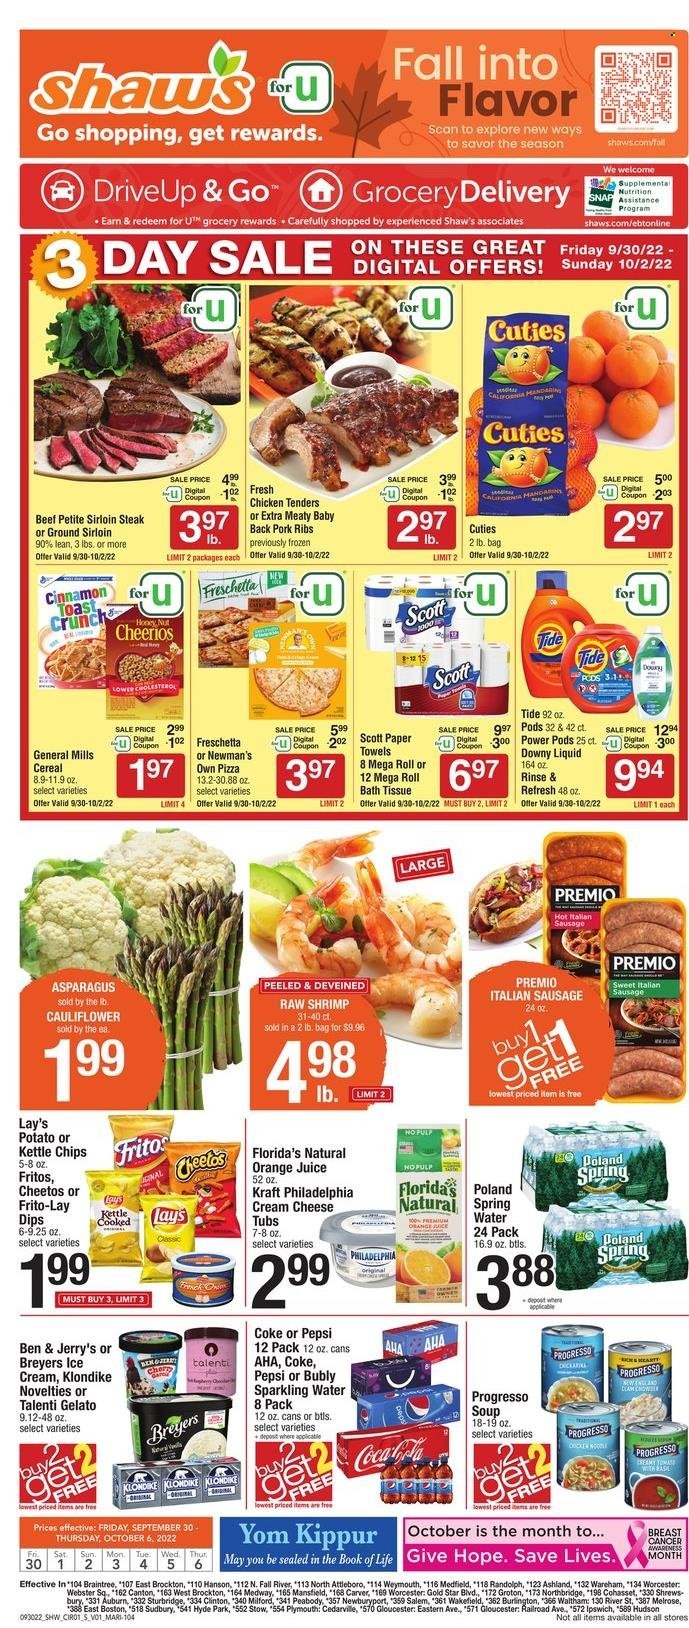 thumbnail - Shaw’s Flyer - 09/30/2022 - 10/06/2022 - Sales products - asparagus, mandarines, clams, shrimps, pizza, chicken tenders, soup, Progresso, Kraft®, italian sausage, cream cheese, Philadelphia, dip, ice cream, Ben & Jerry's, Talenti Gelato, gelato, Florida's Natural, General Mills, Fritos, Cheetos, Lay’s, Frito-Lay, Kettle chips, salty snack, Cheerios, cinnamon, Coca-Cola, Pepsi, orange juice, juice, soft drink, Coke, sparkling water, carbonated soft drink, beef meat, beef sirloin, ground beef, steak, sirloin steak, pork meat, pork ribs, pork back ribs, bath tissue, Scott, kitchen towels, paper towels, Tide, Downy Laundry. Page 1.